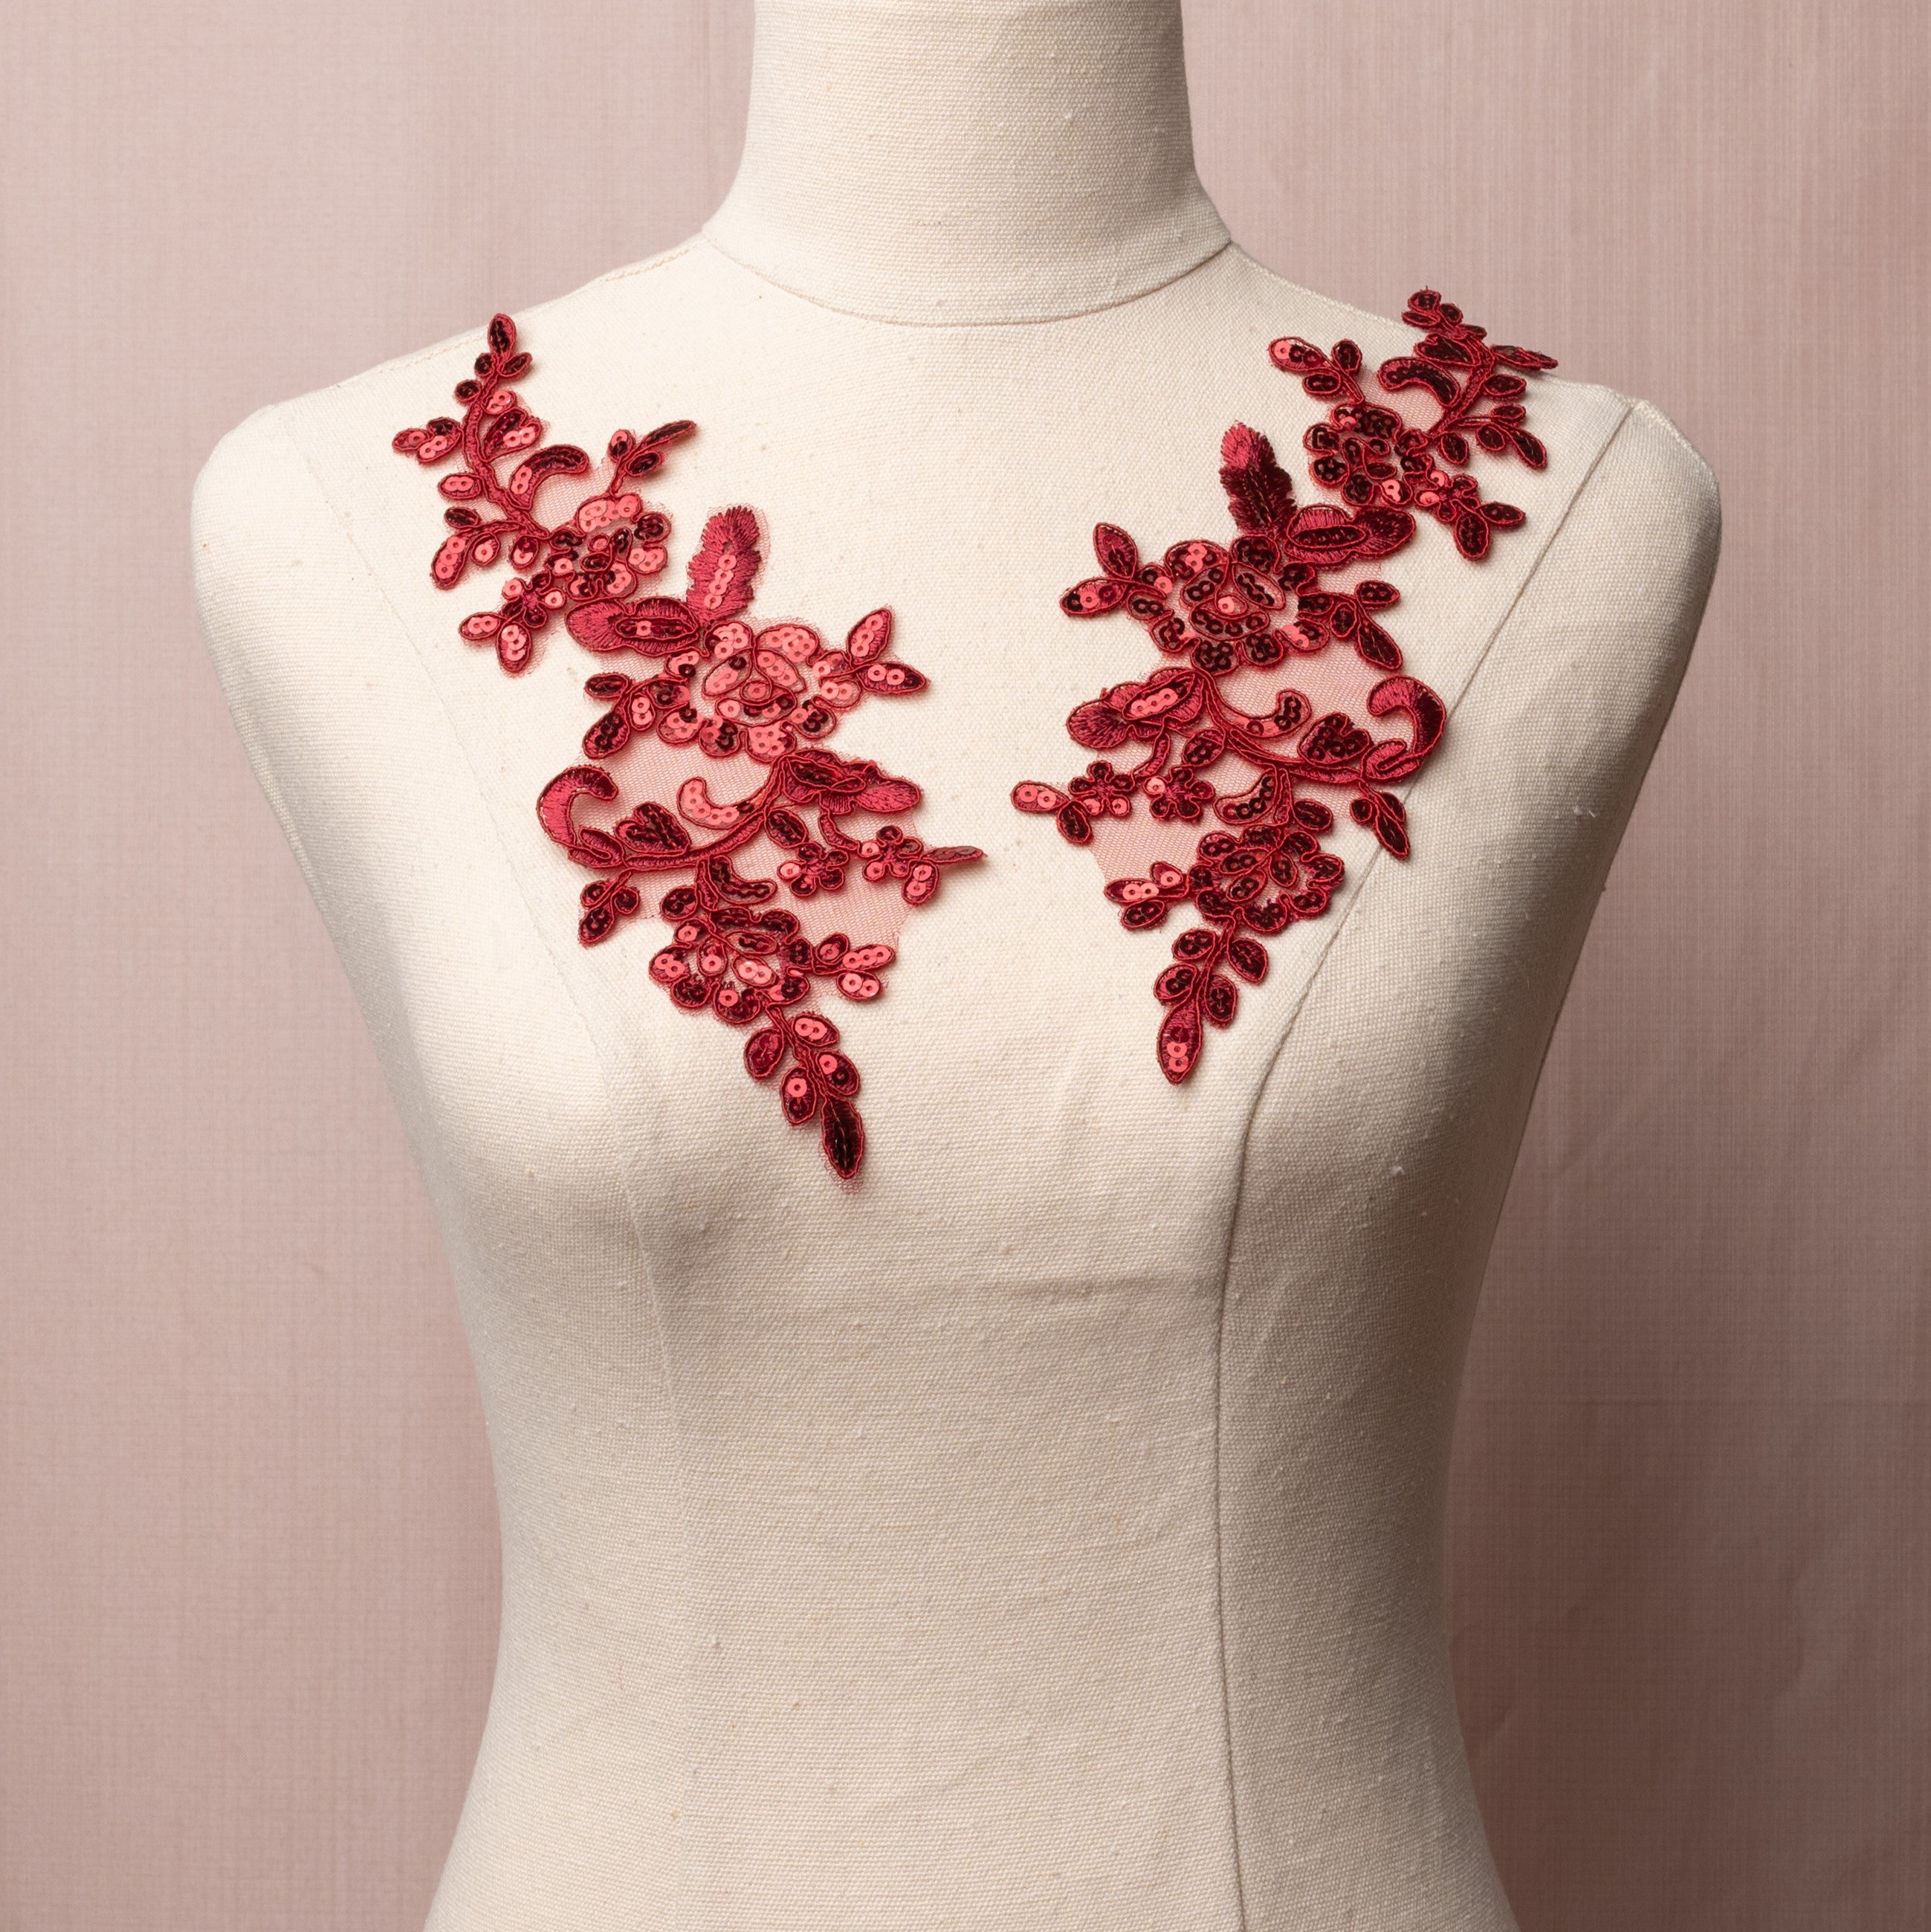 Burgundy sequinned floral applique pair displayed on a mannequin.